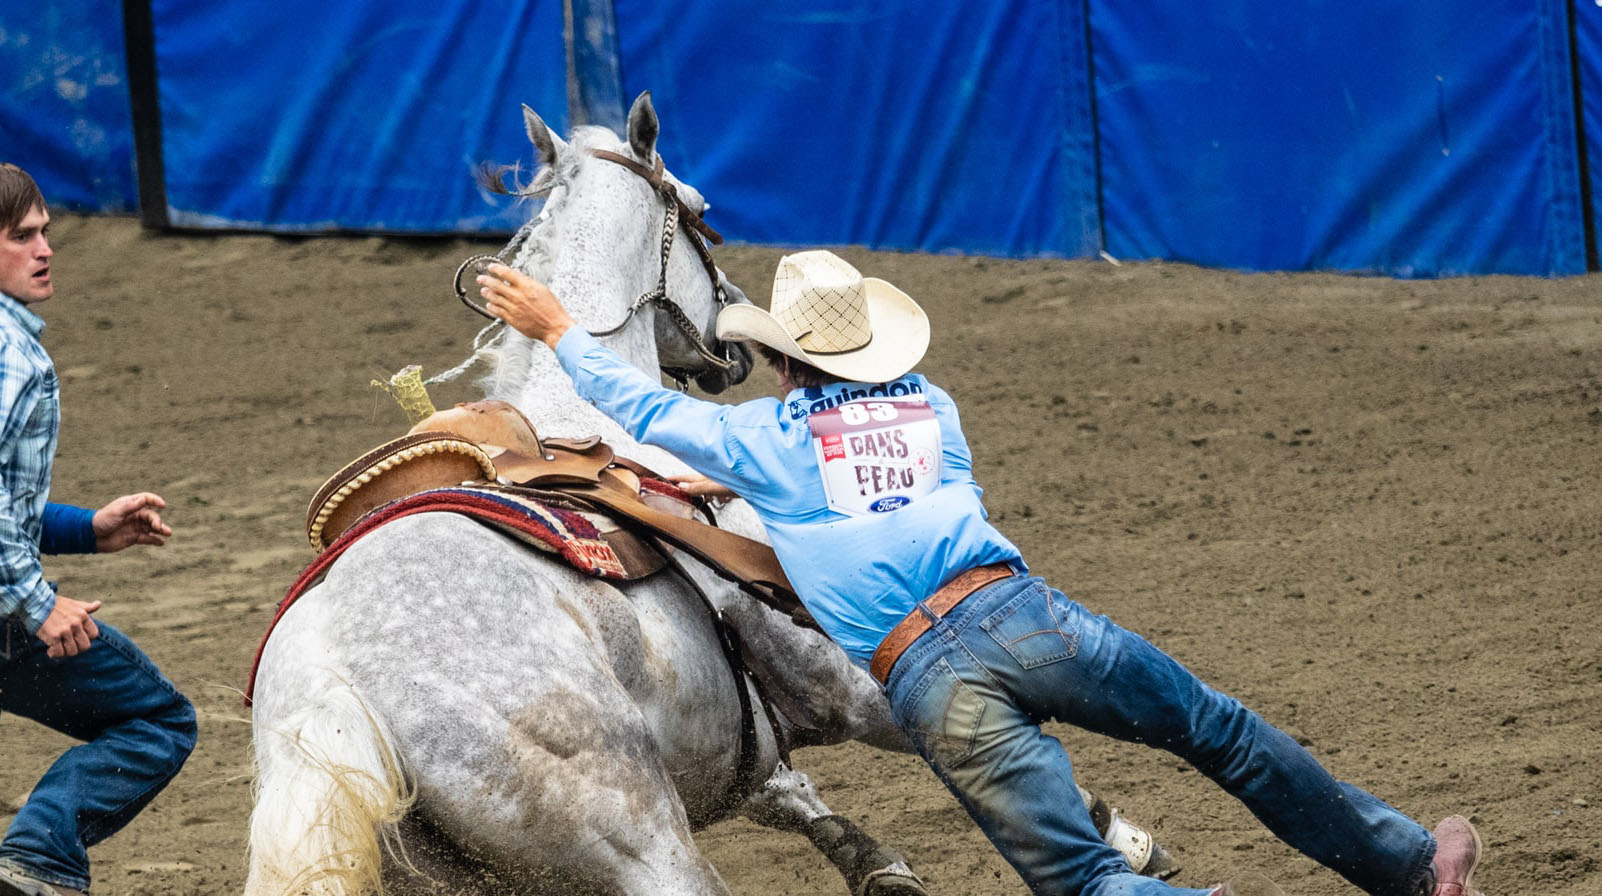 Pecos Rodeo Schedule & Tickets for 2023 Dates Buy Pecos Rodeo Tickets